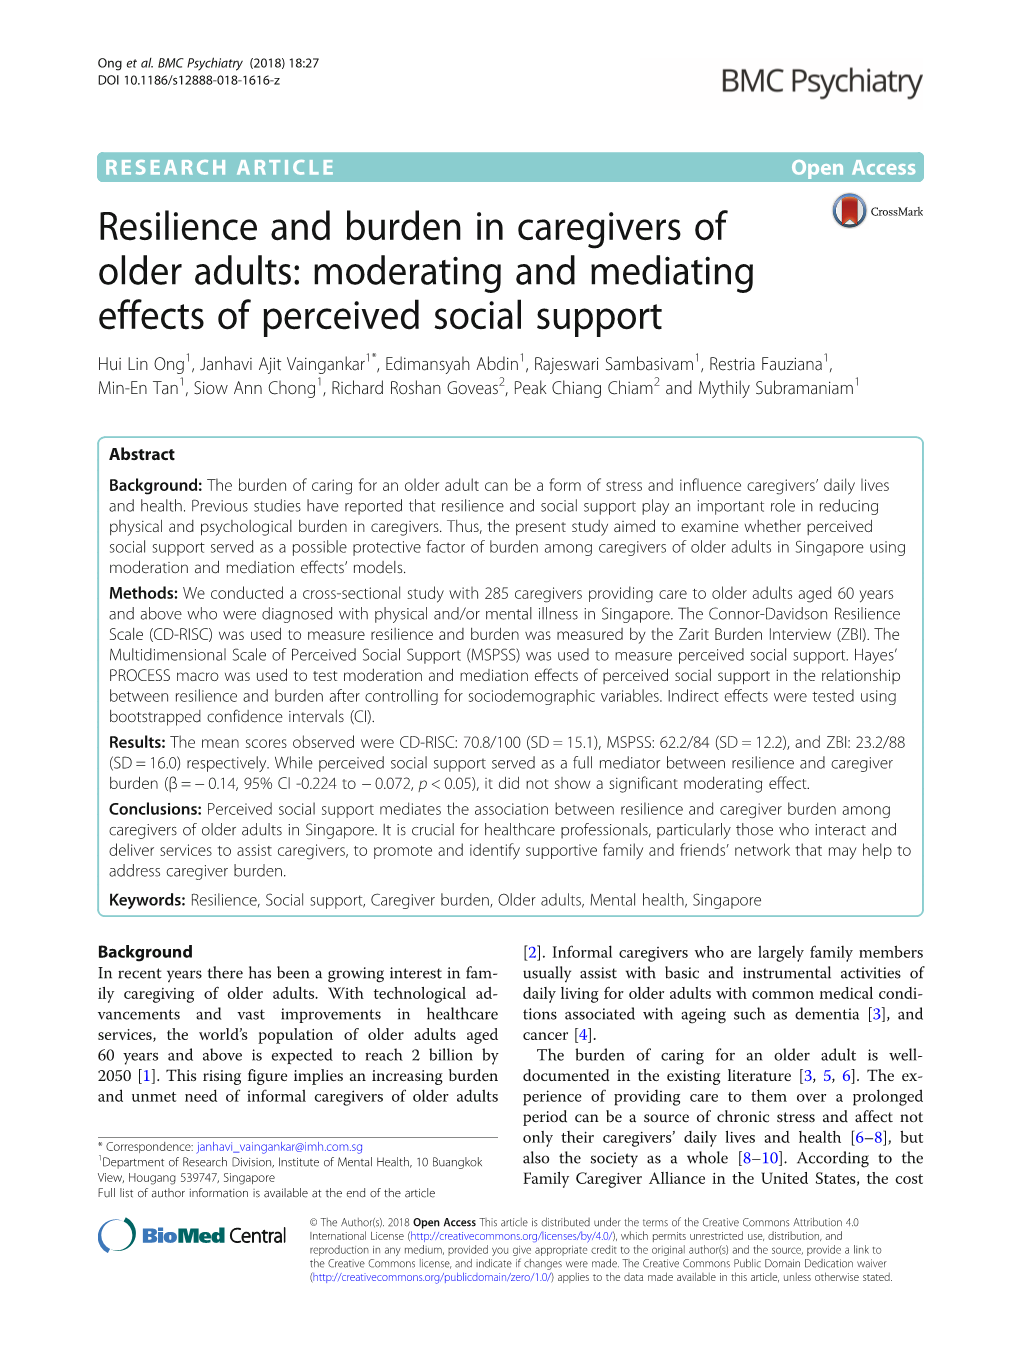 Resilience and Burden in Caregivers of Older Adults